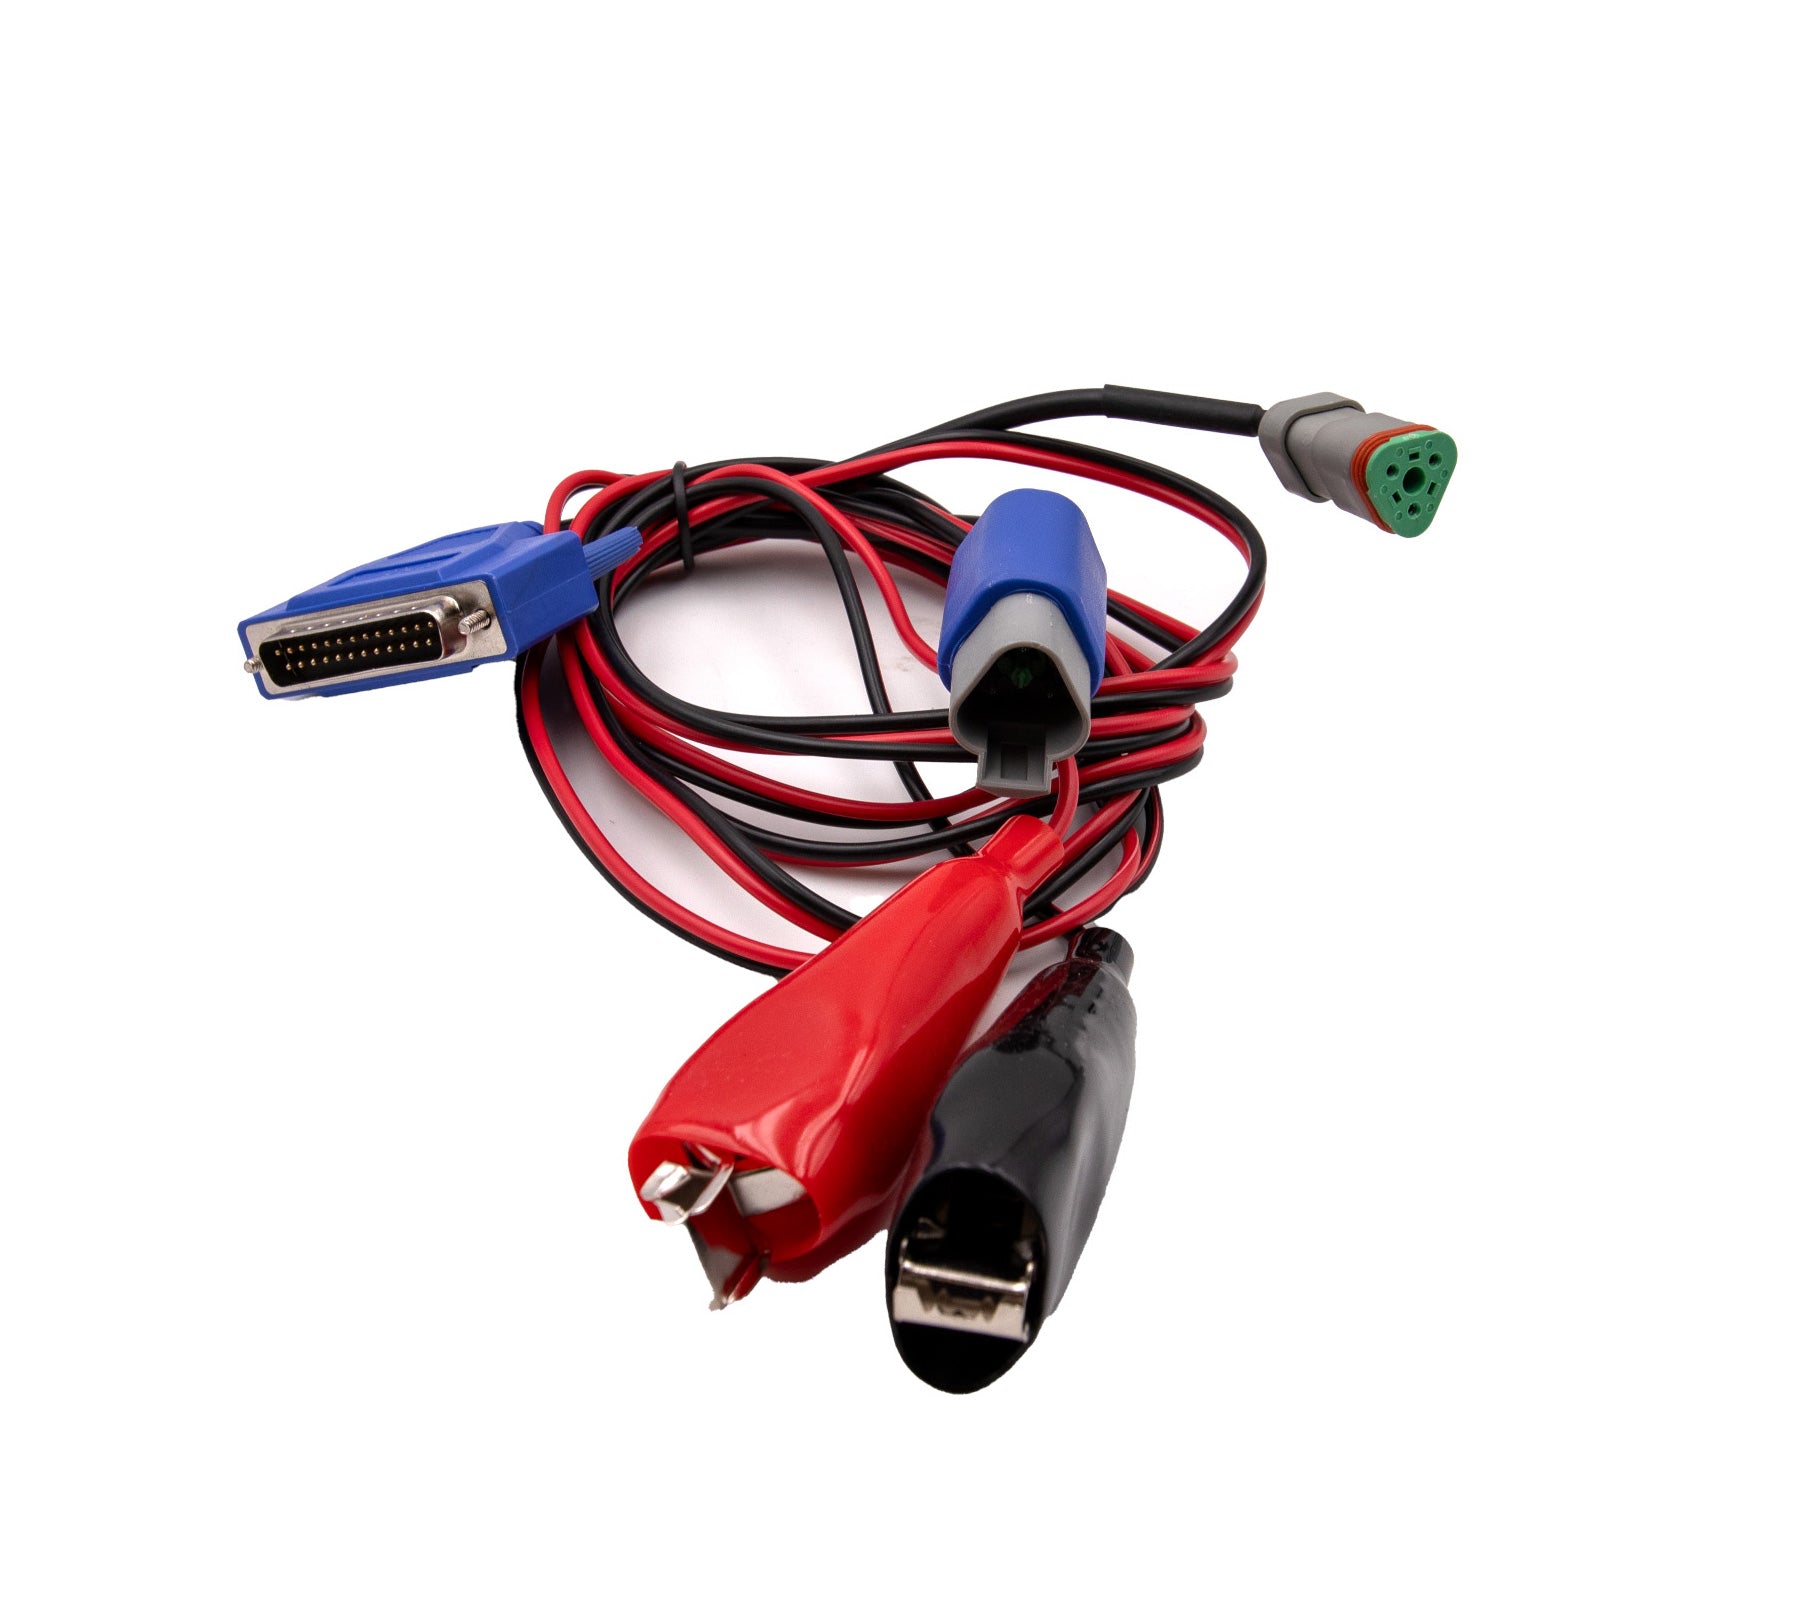 Diesel Laptops Cummins 3 Pin Cable for DPA5